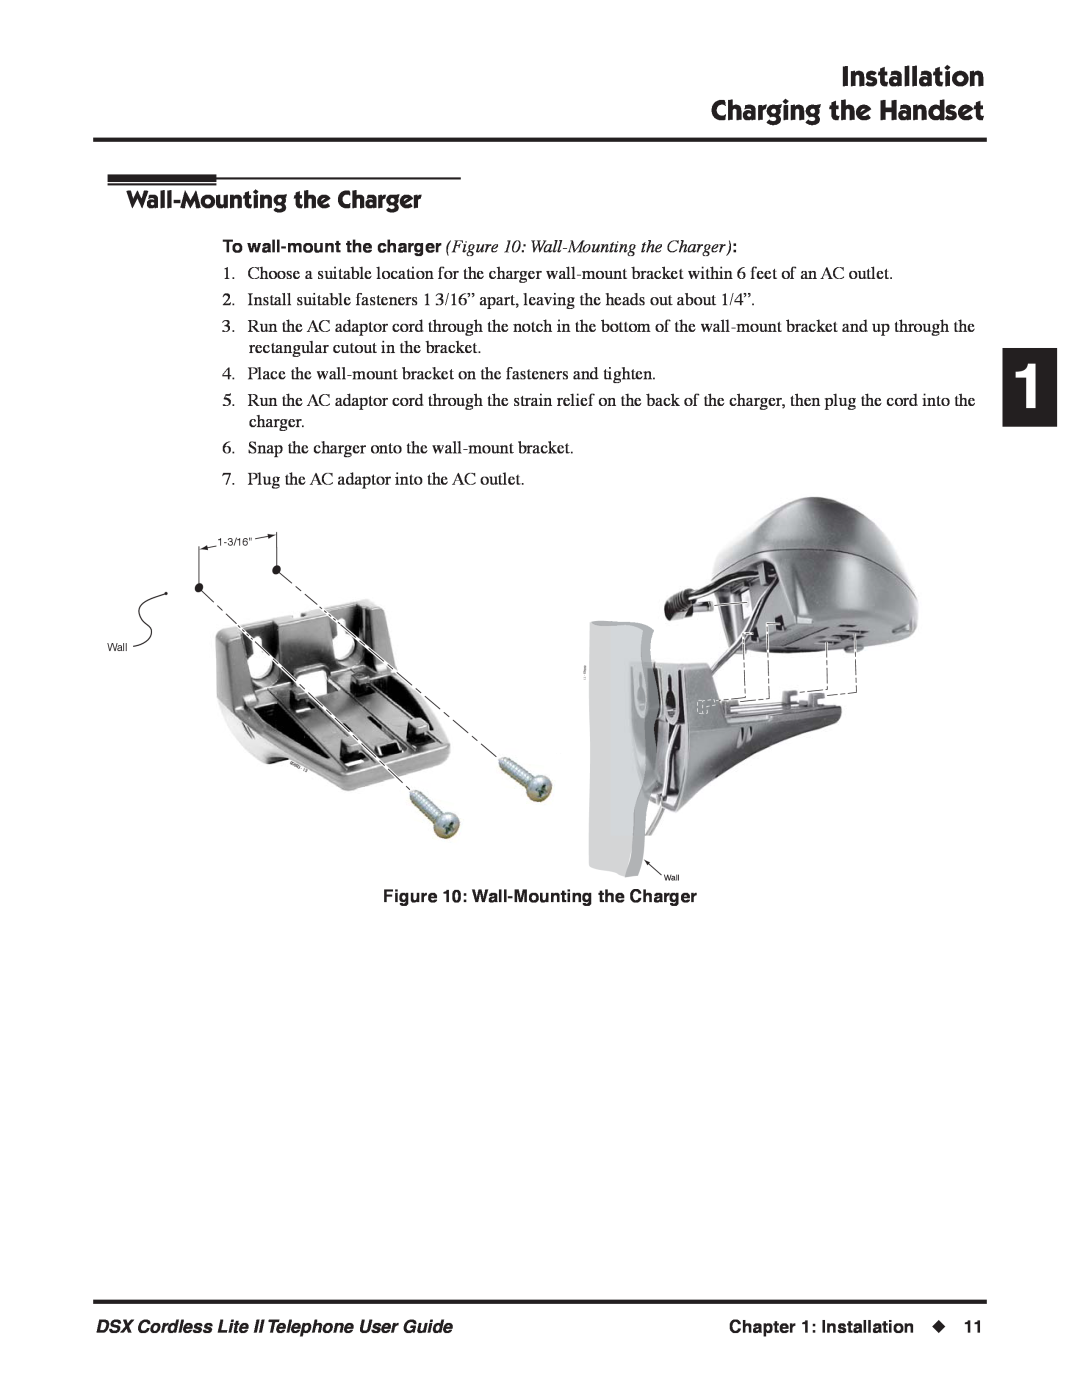 NEC P, N 1093092 Installation Charging the Handset, Wall-Mountingthe Charger, DSX Cordless Lite II Telephone User Guide 